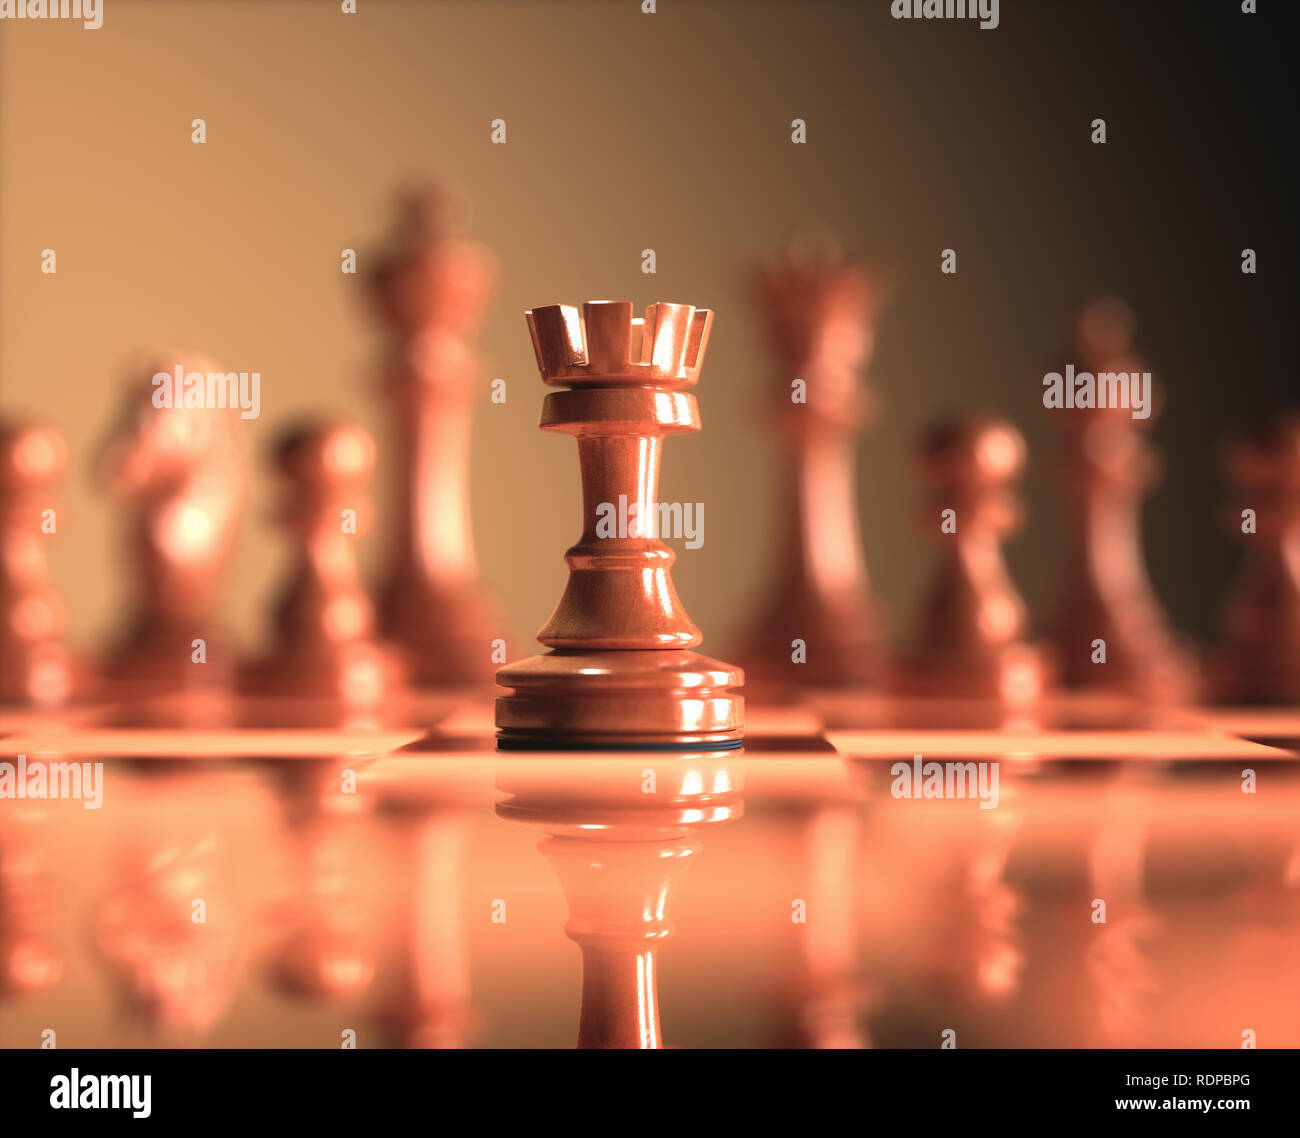 22+ Thousand Chess Rook Isolated Royalty-Free Images, Stock Photos